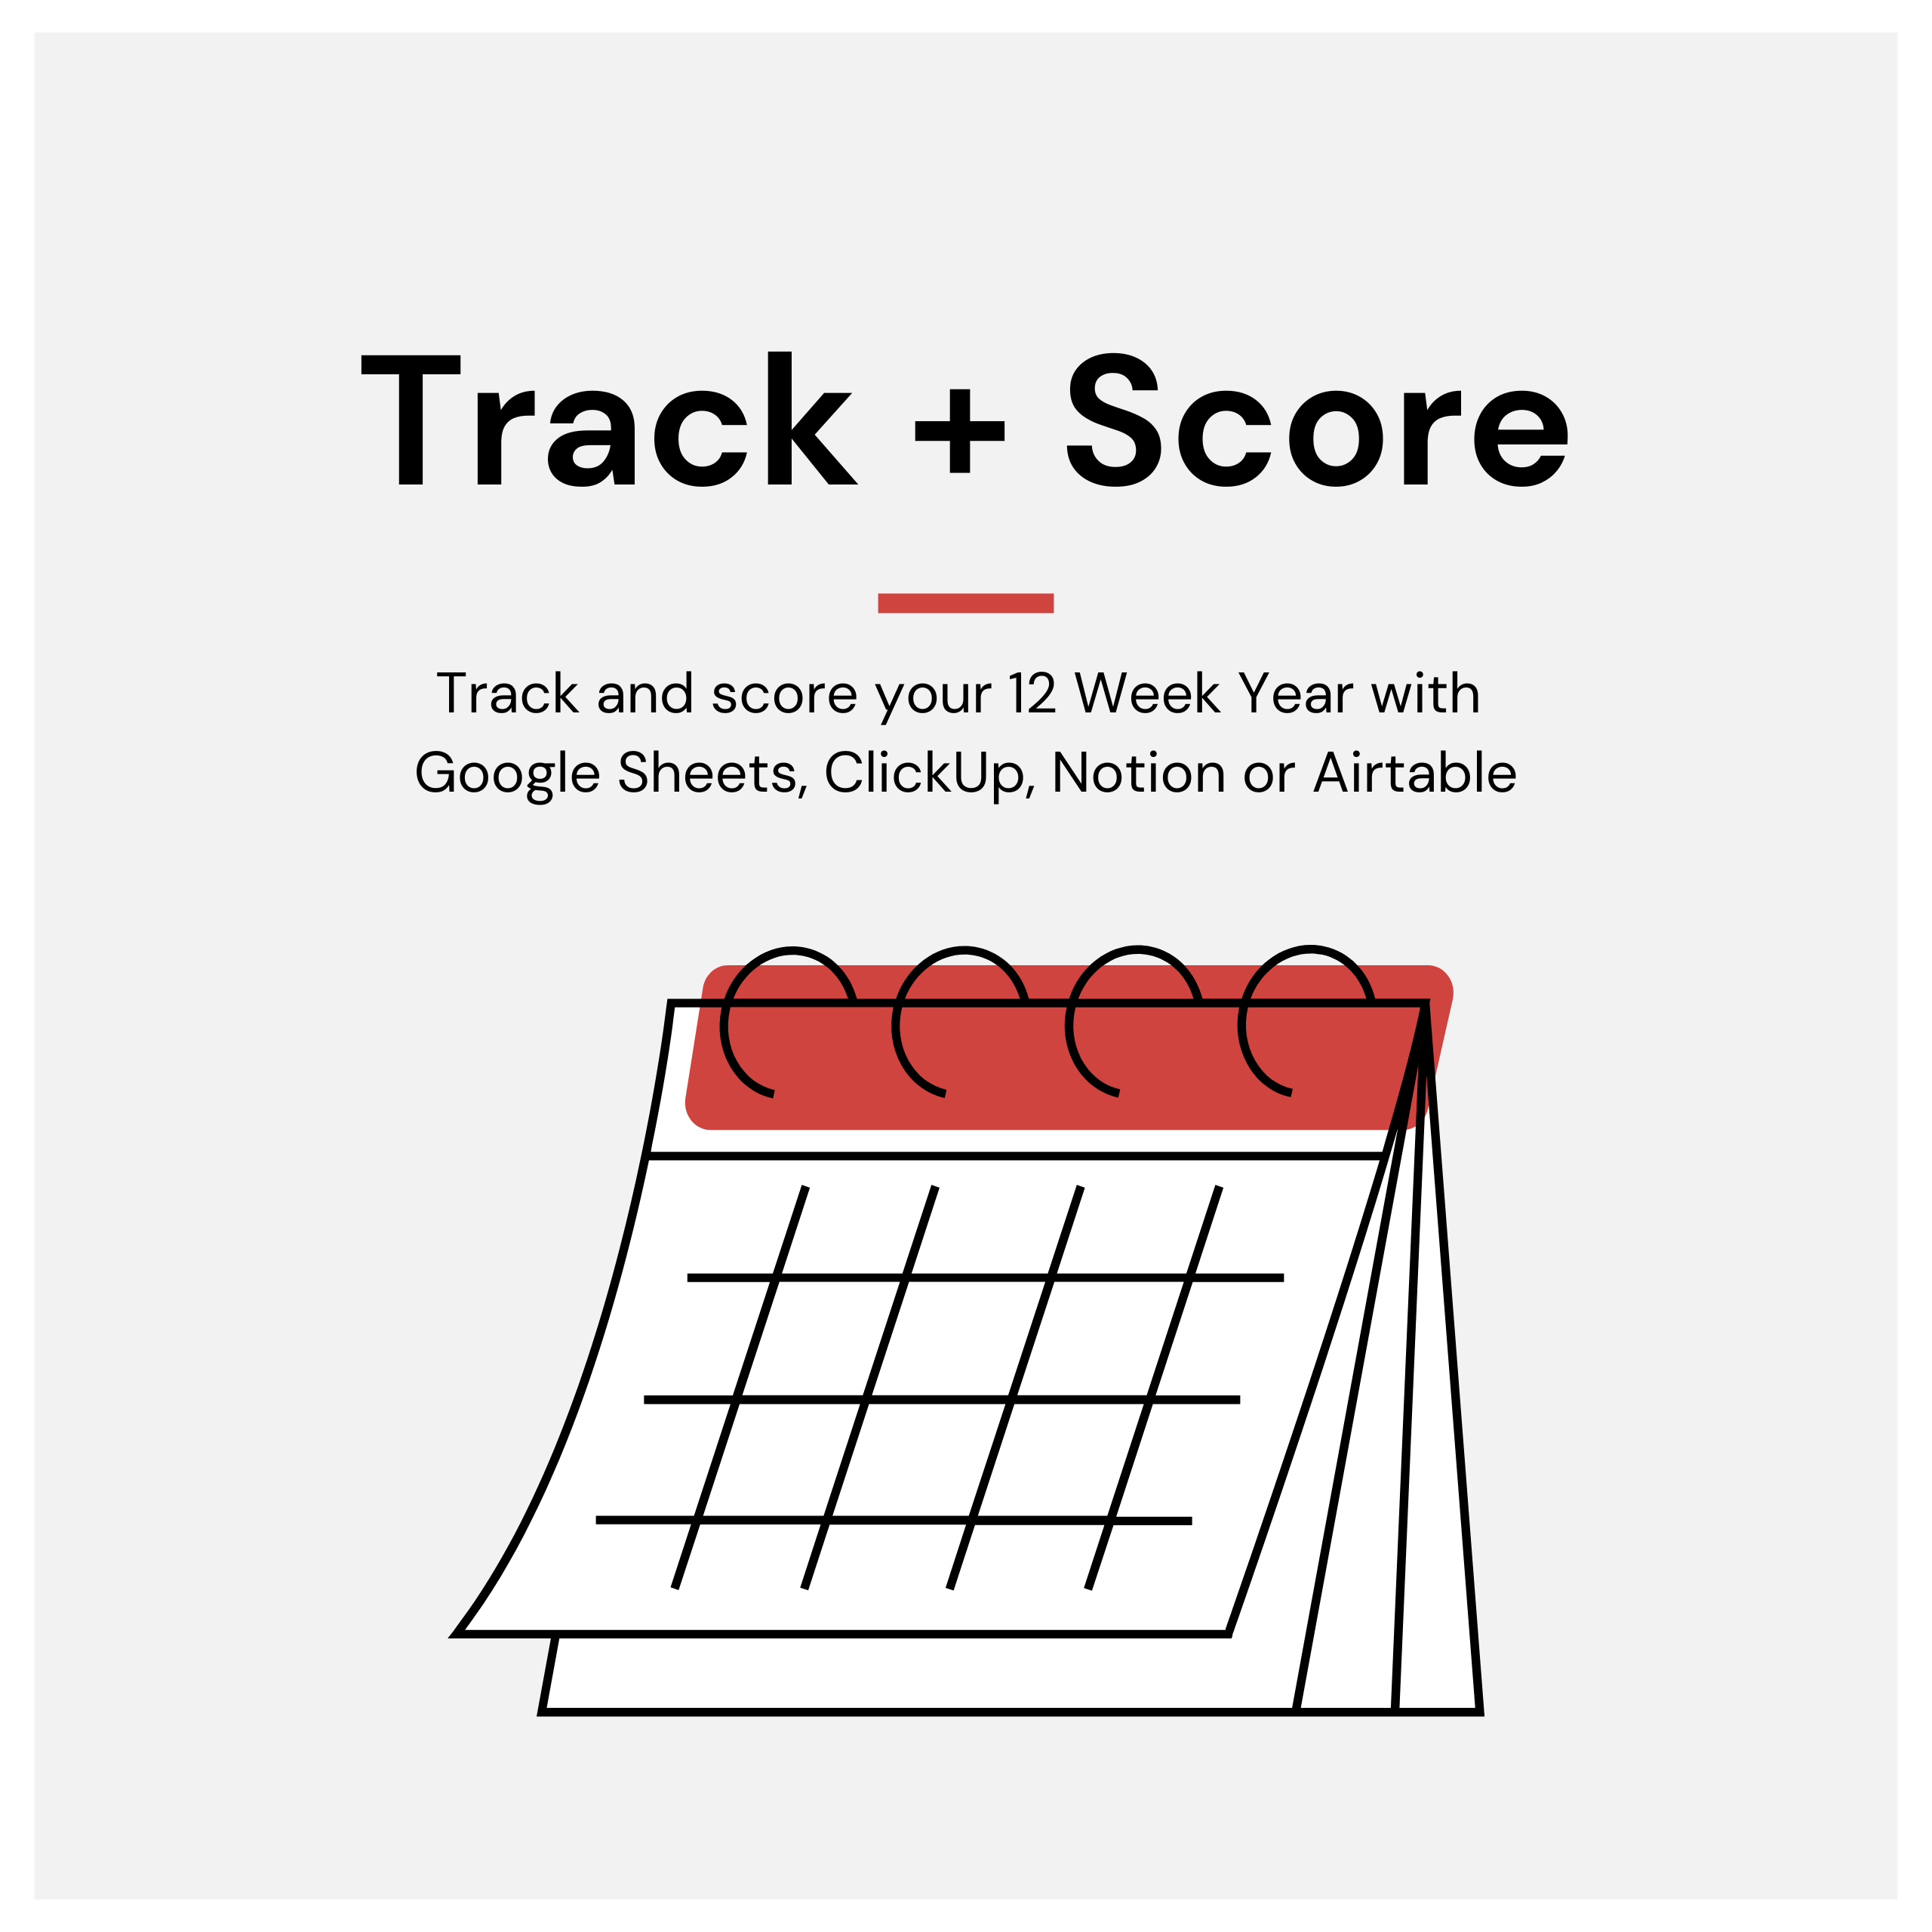 Track and score your 12 Week Year with Google Sheets, ClickUp, Notion or Airtable